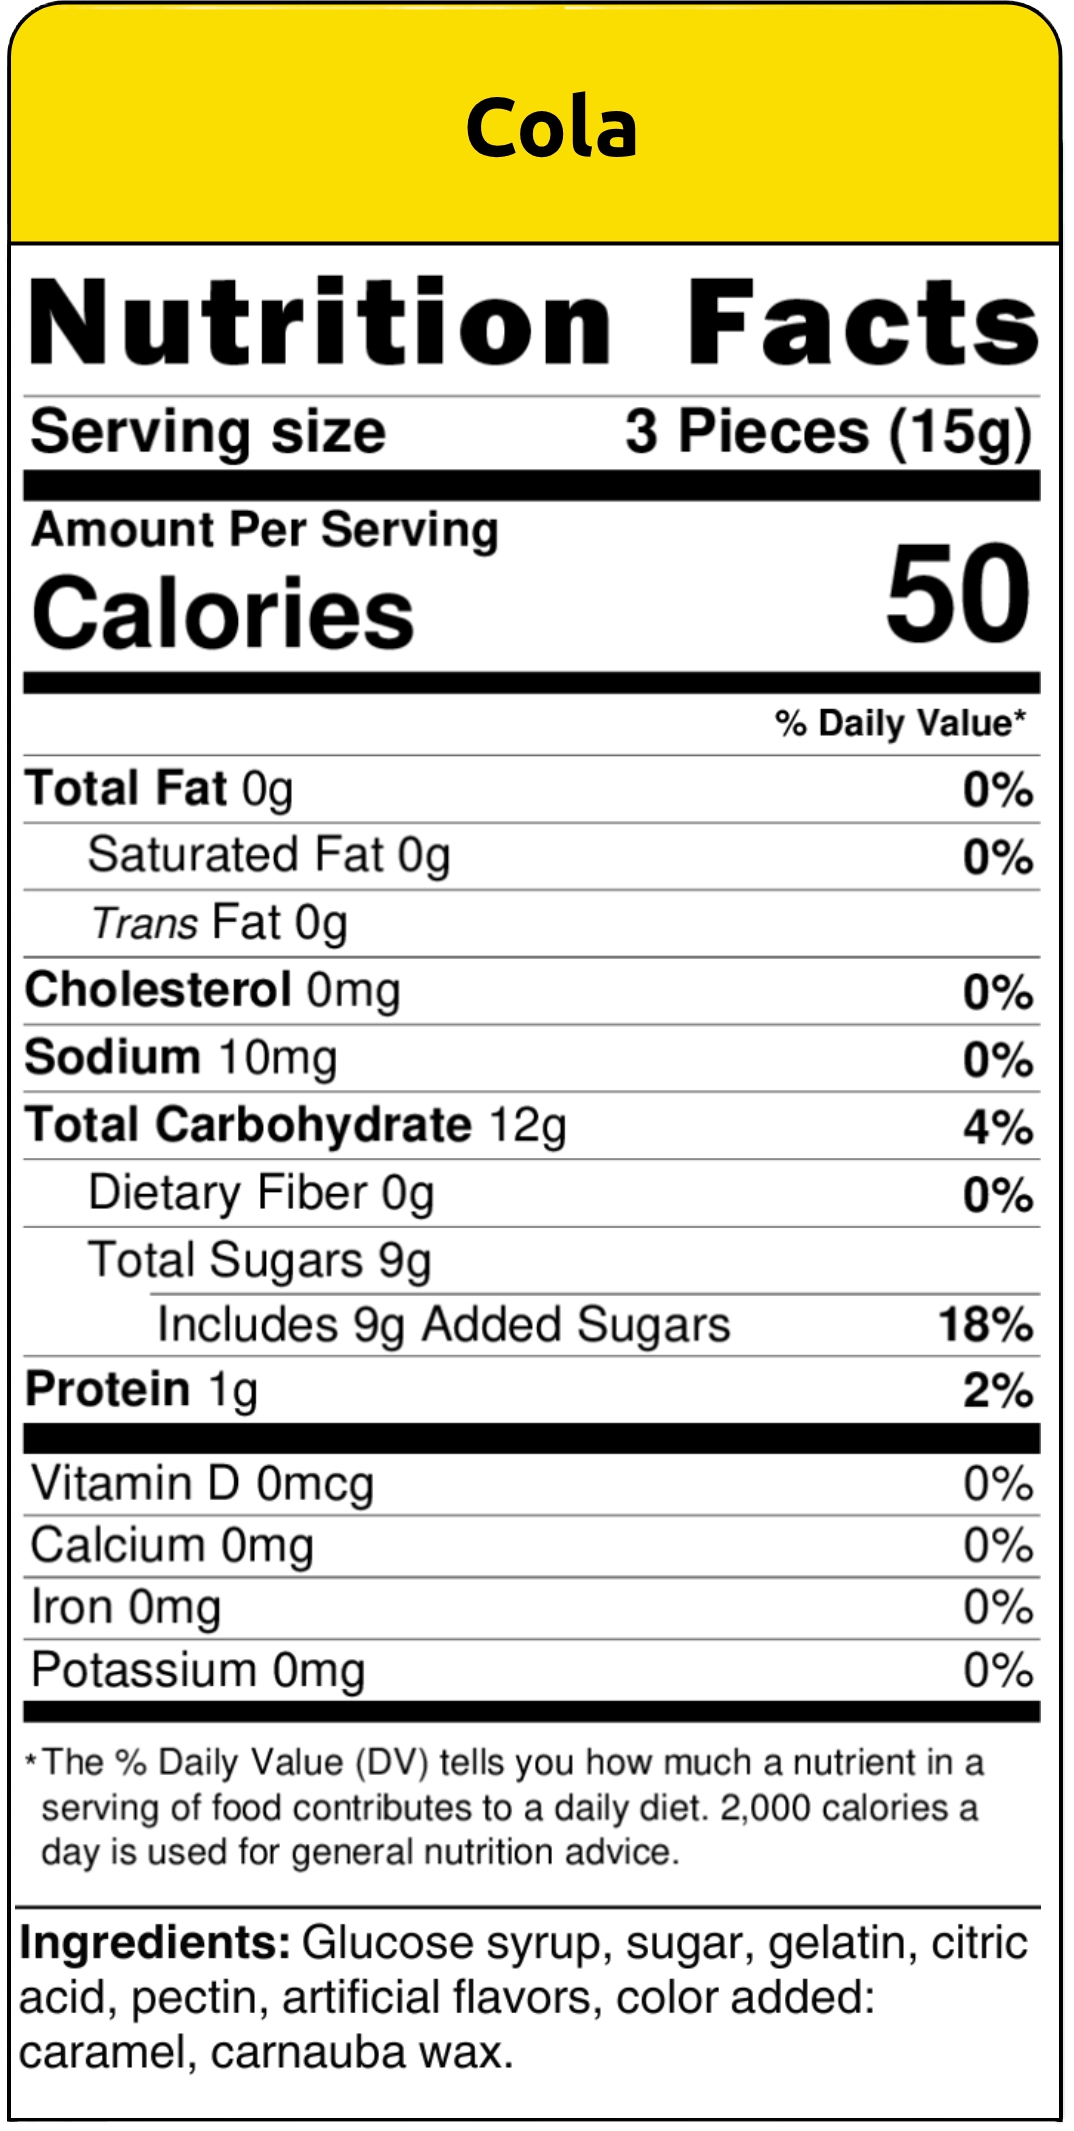 nutritional facts cola